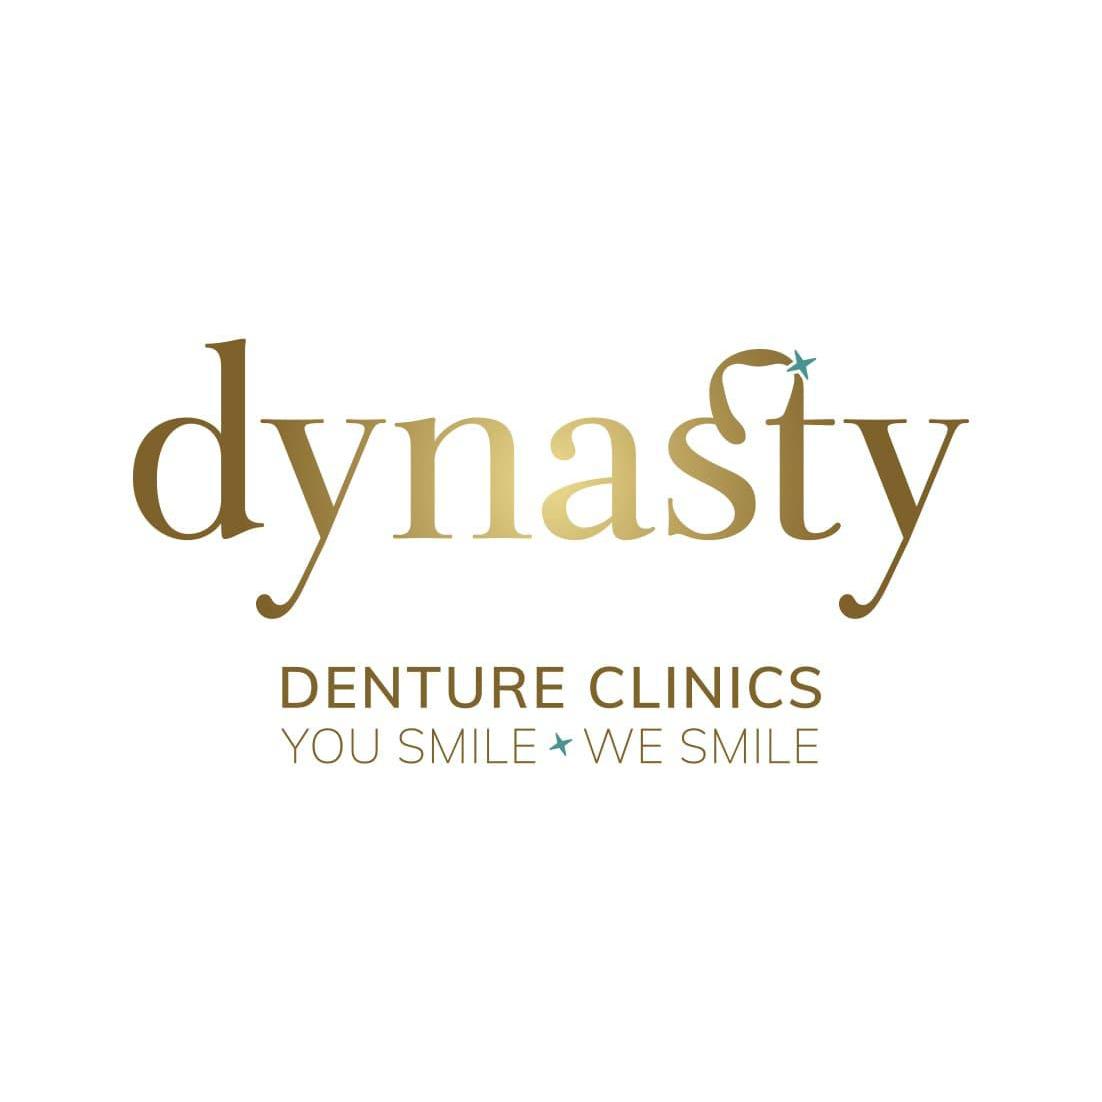 Dynasty Denture Clinics & Labratory - Pudsey, West Yorkshire LS28 7BN - 01135 370771 | ShowMeLocal.com